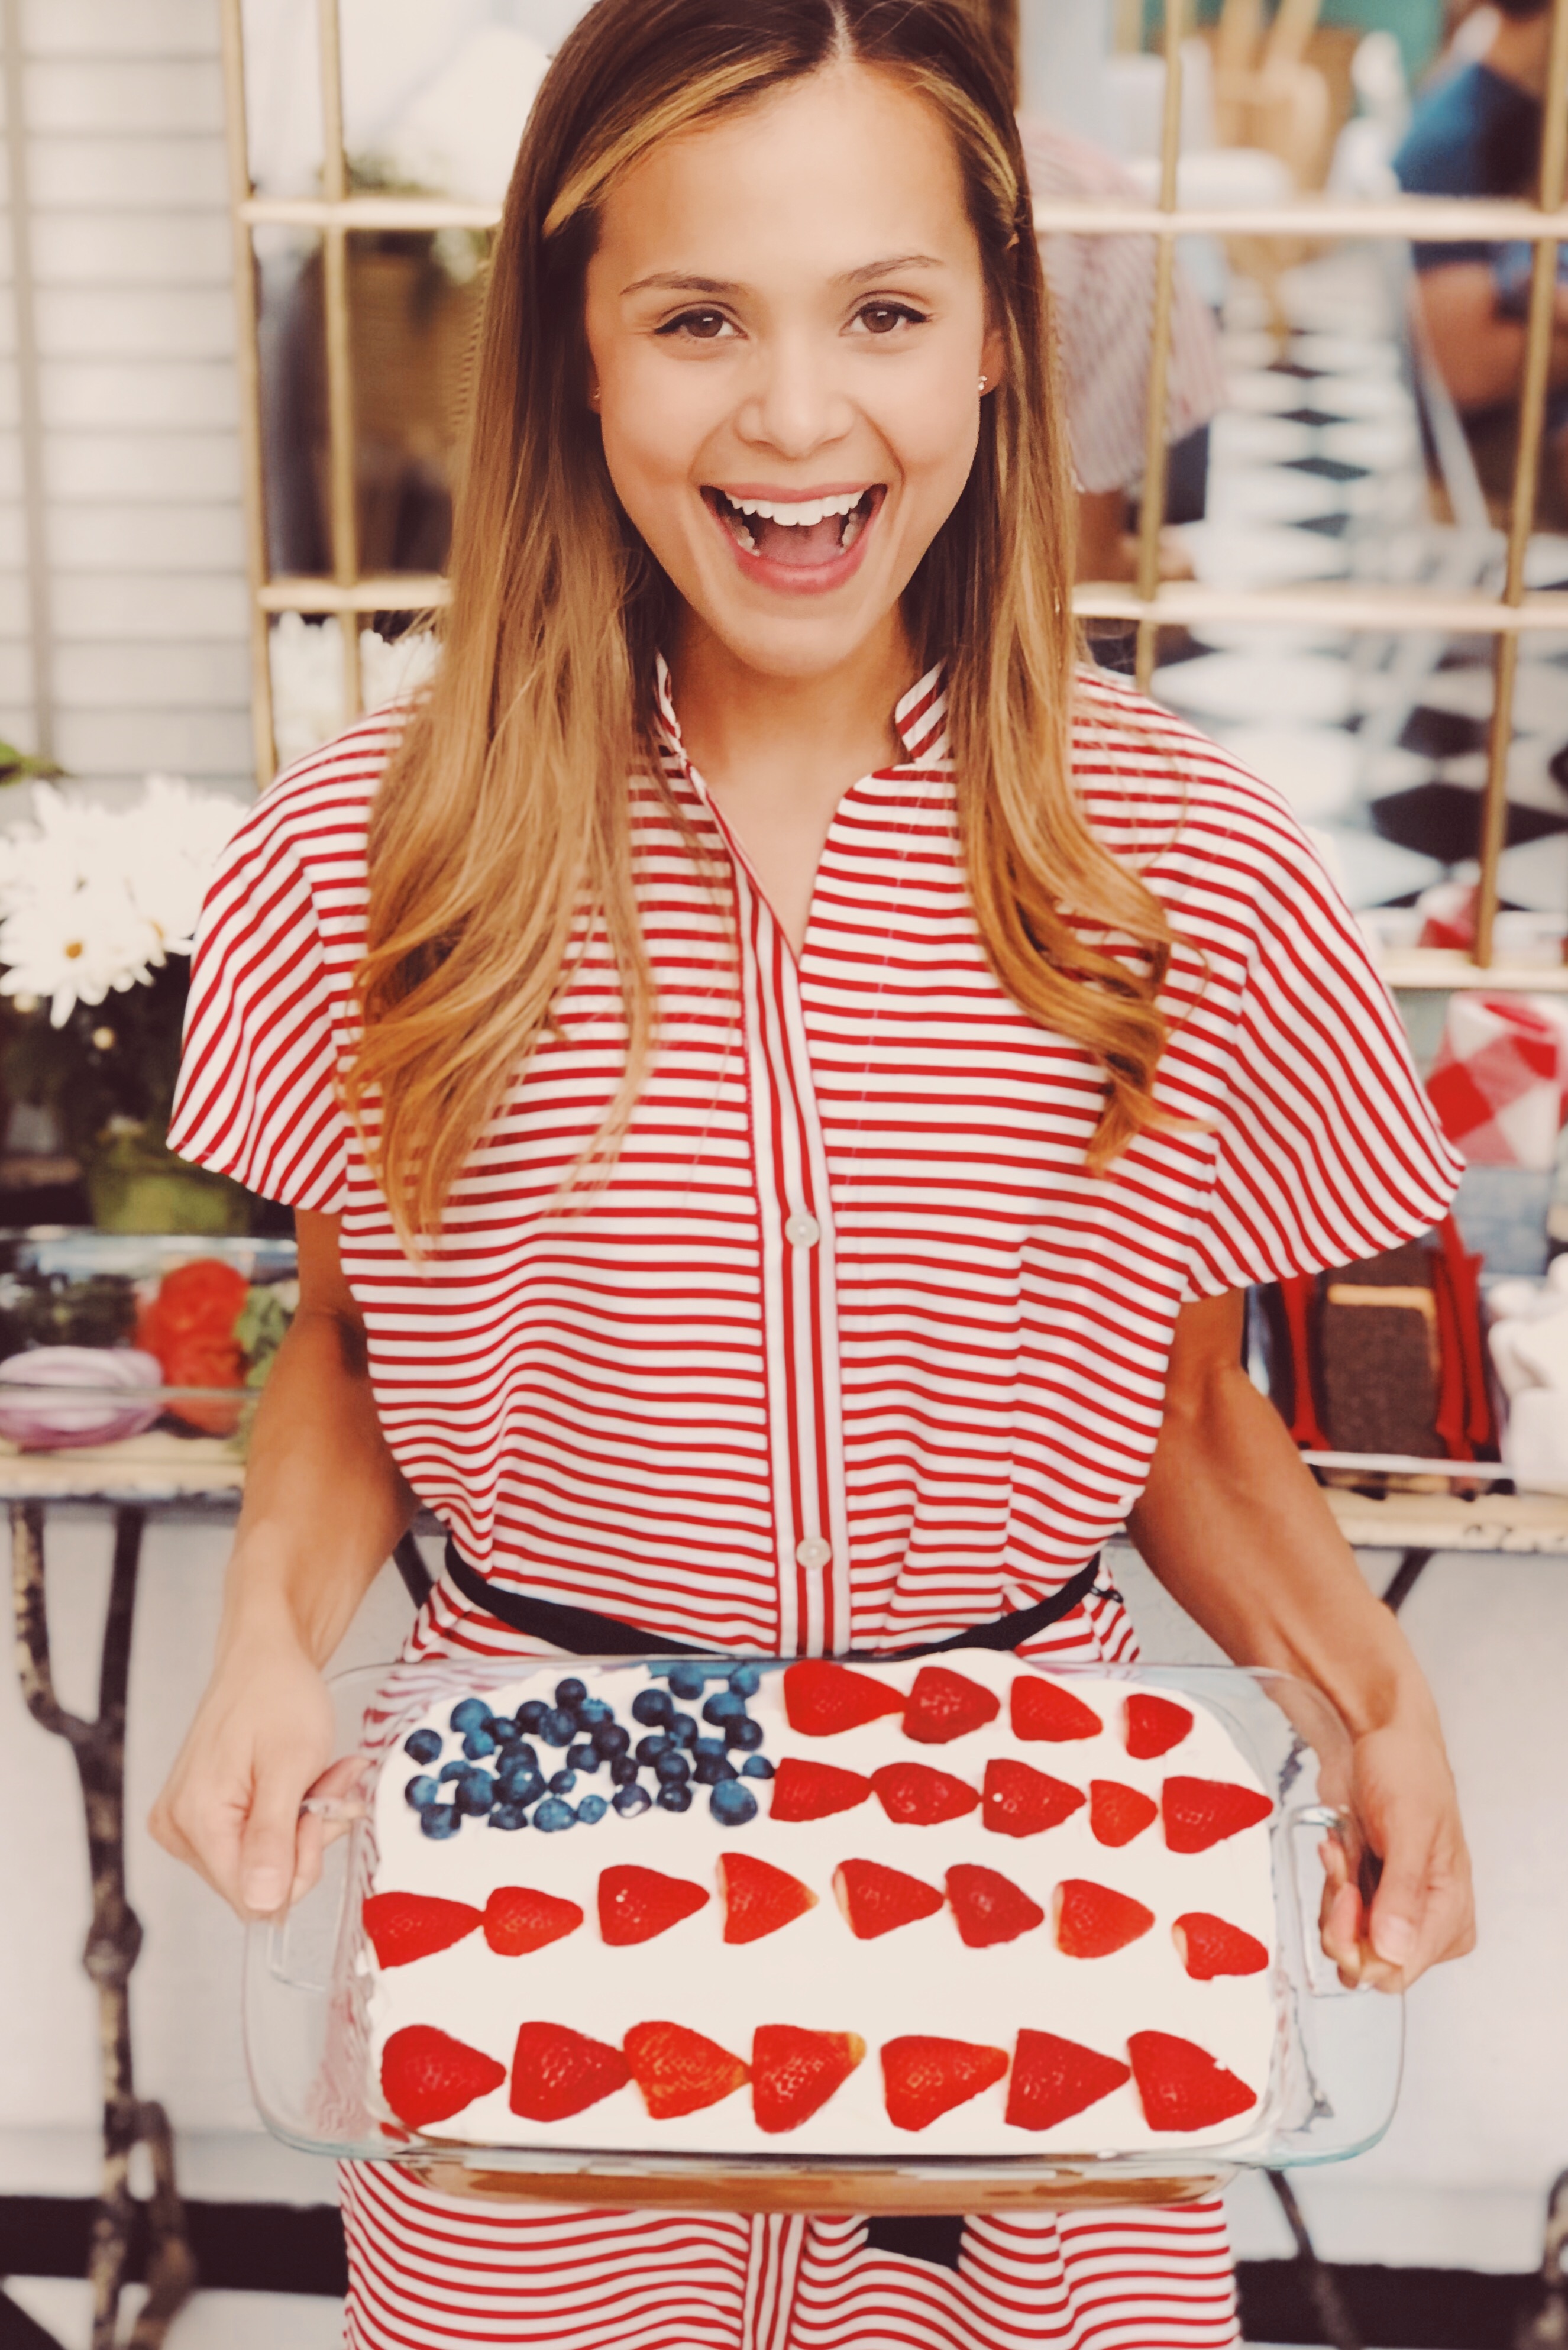 4th of July Flag Cake and Striped Red Dress 